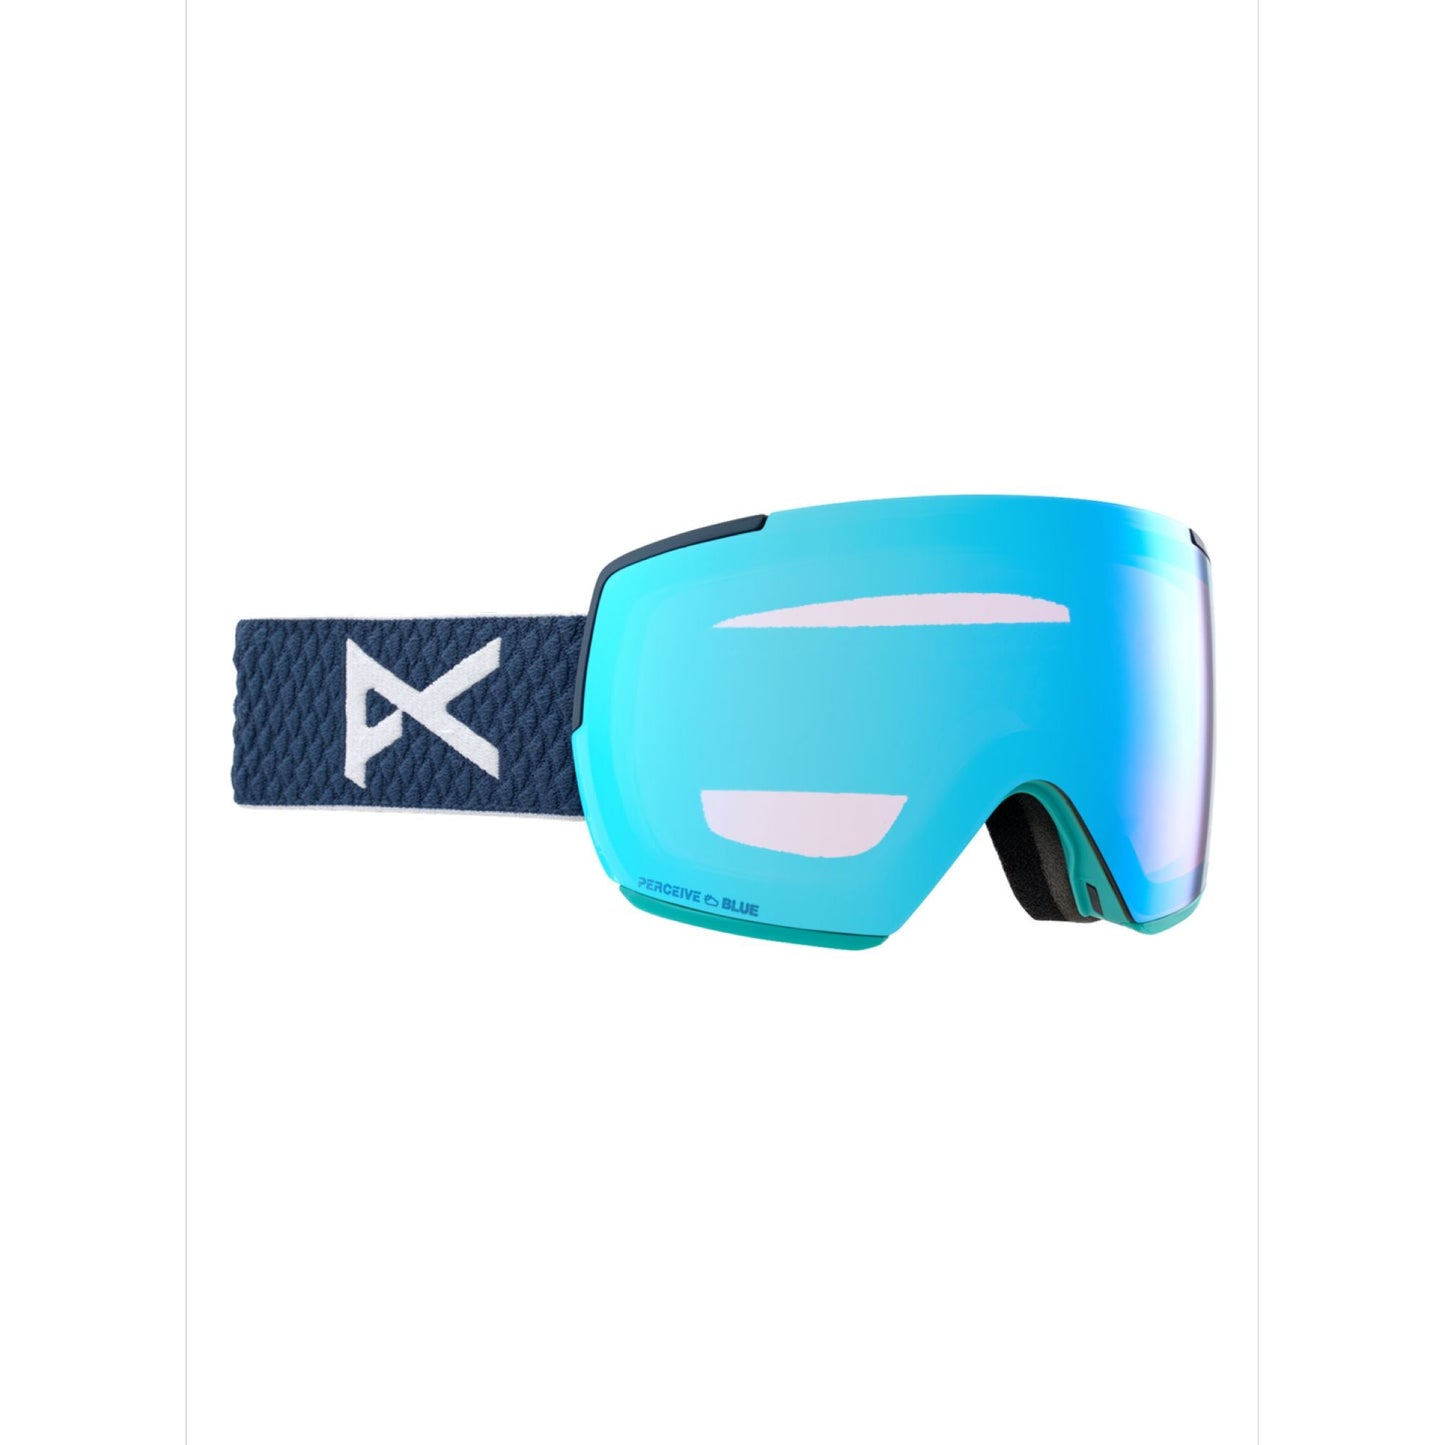 Anon M5 Snow Goggles - Openbox Nightfall Perceive Variable Blue - Anon Snow Goggles